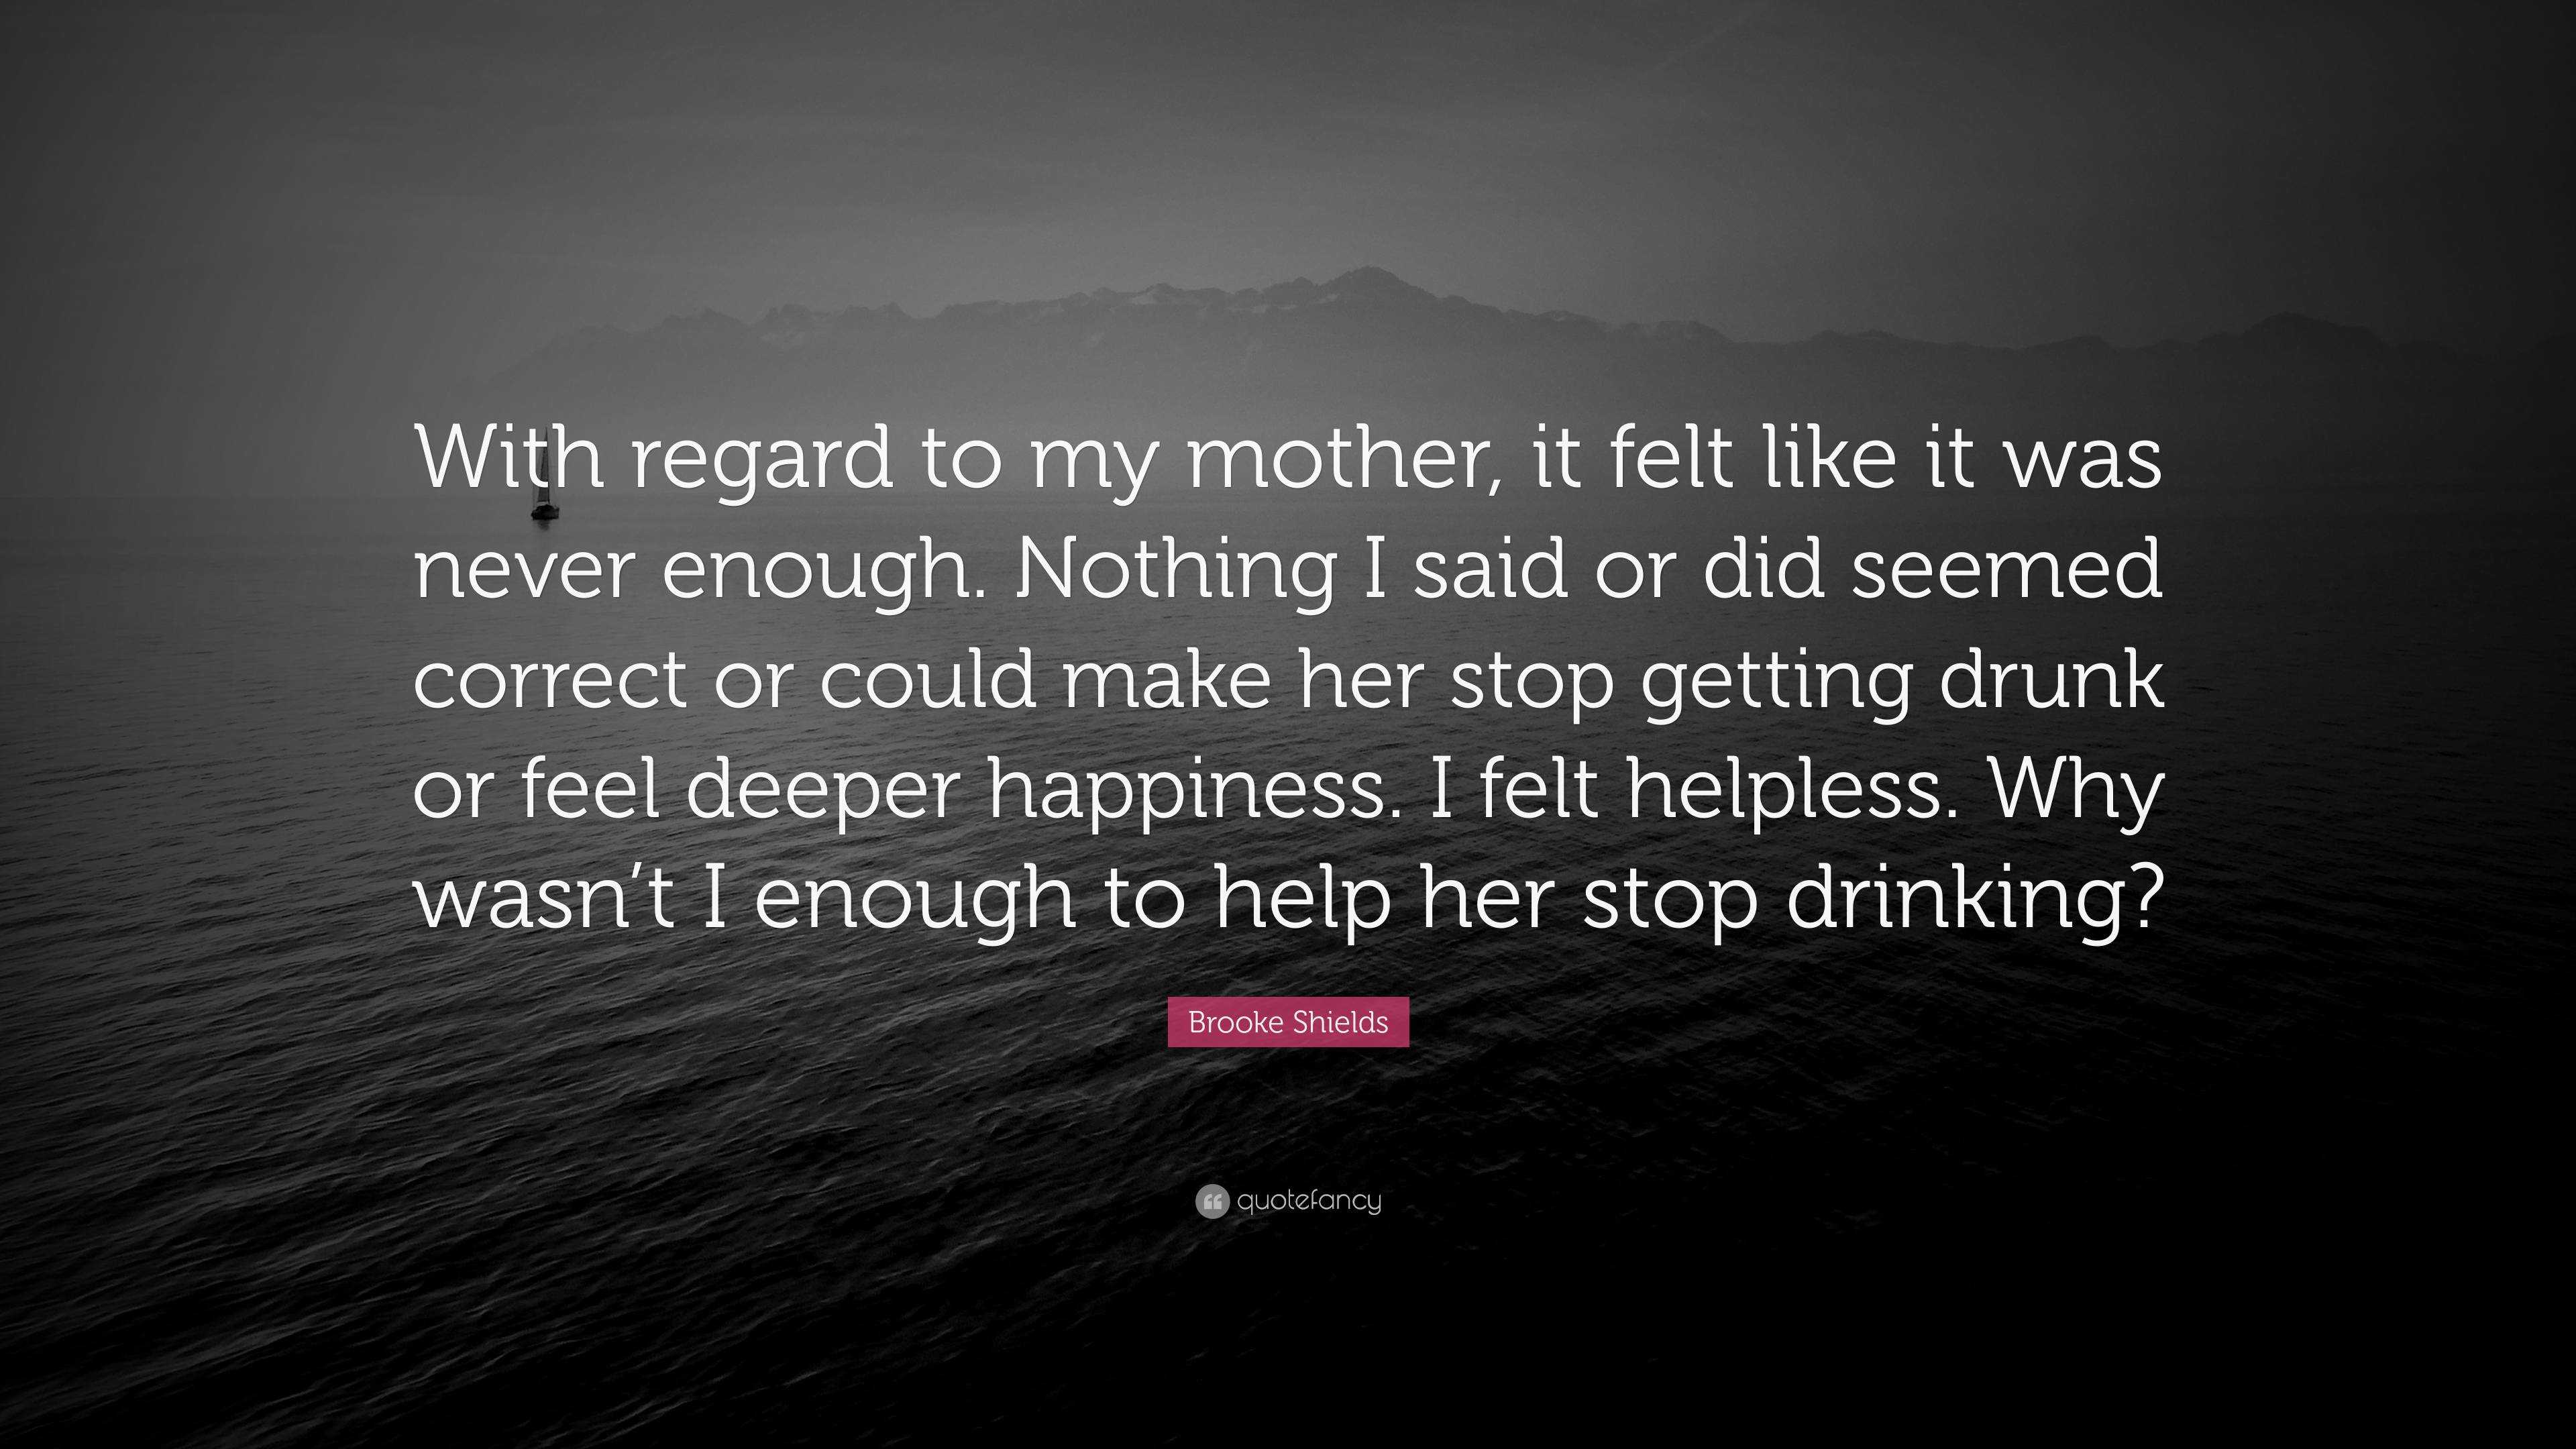 Brooke Shields Quote “with Regard To My Mother It Felt Like It Was